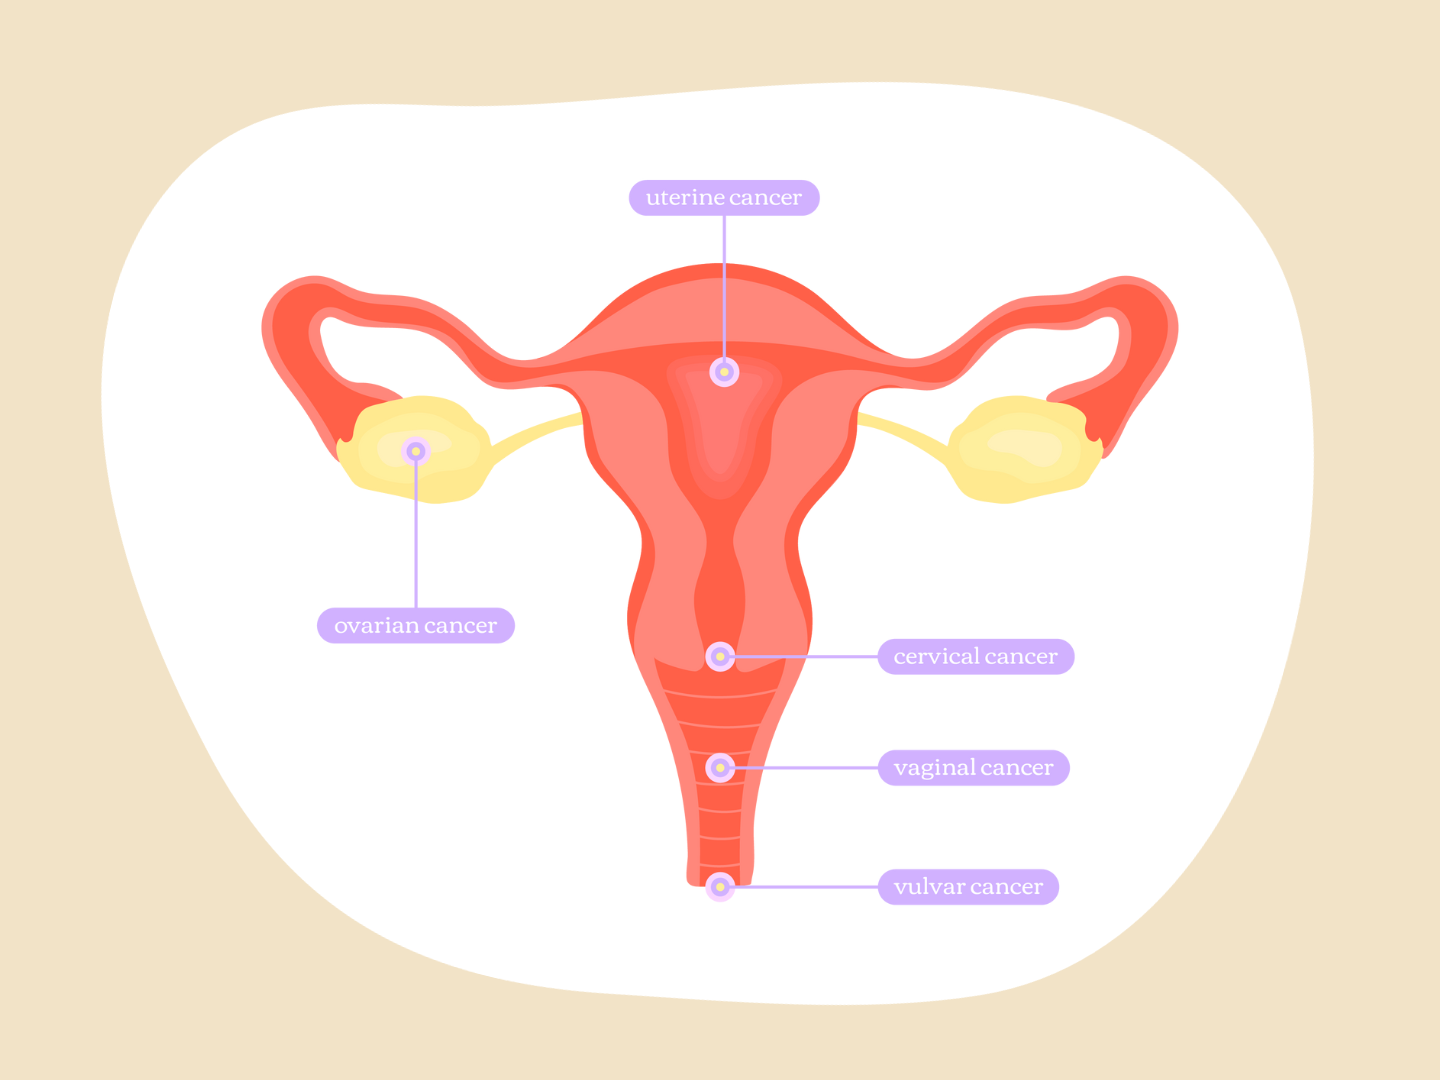 An illustration of a reproductive system including uterus, fallopian tubes, ovaries, cervix, and vagina, with each part labelled.